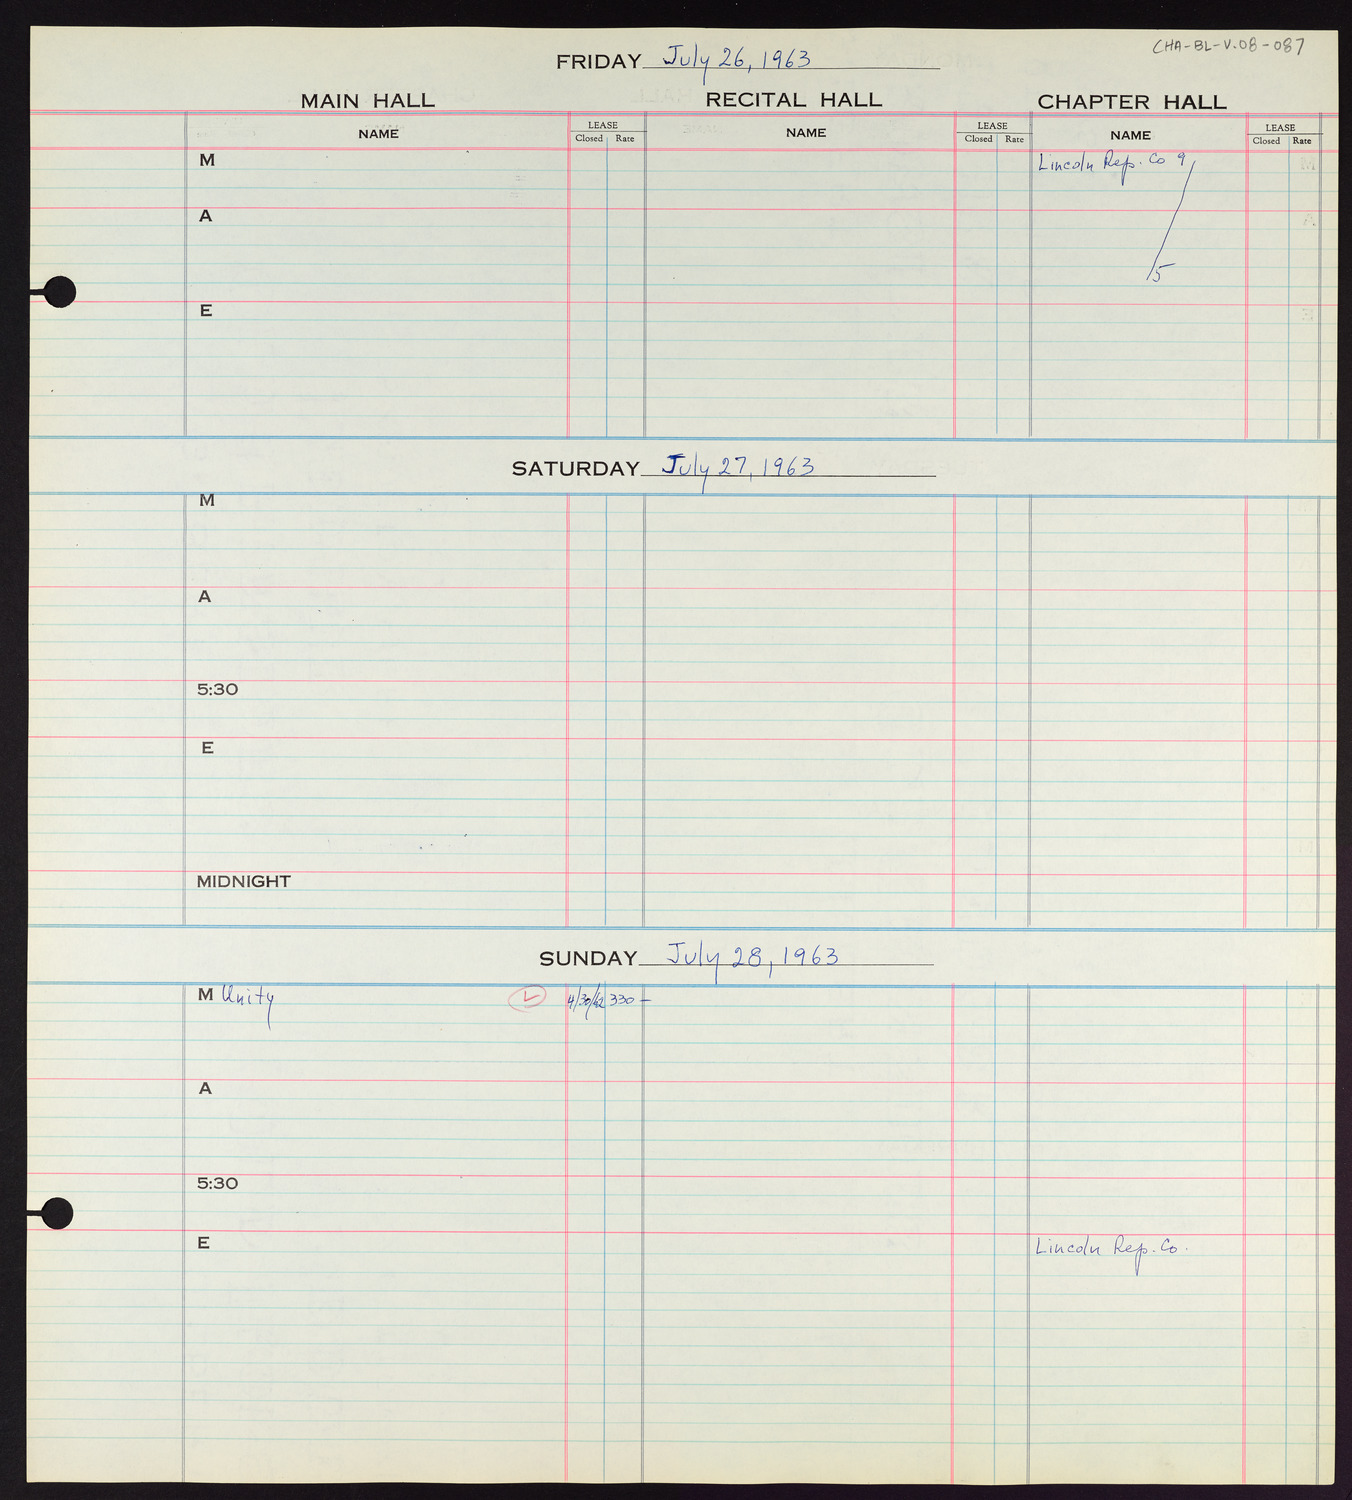 Carnegie Hall Booking Ledger, volume 8, page 87